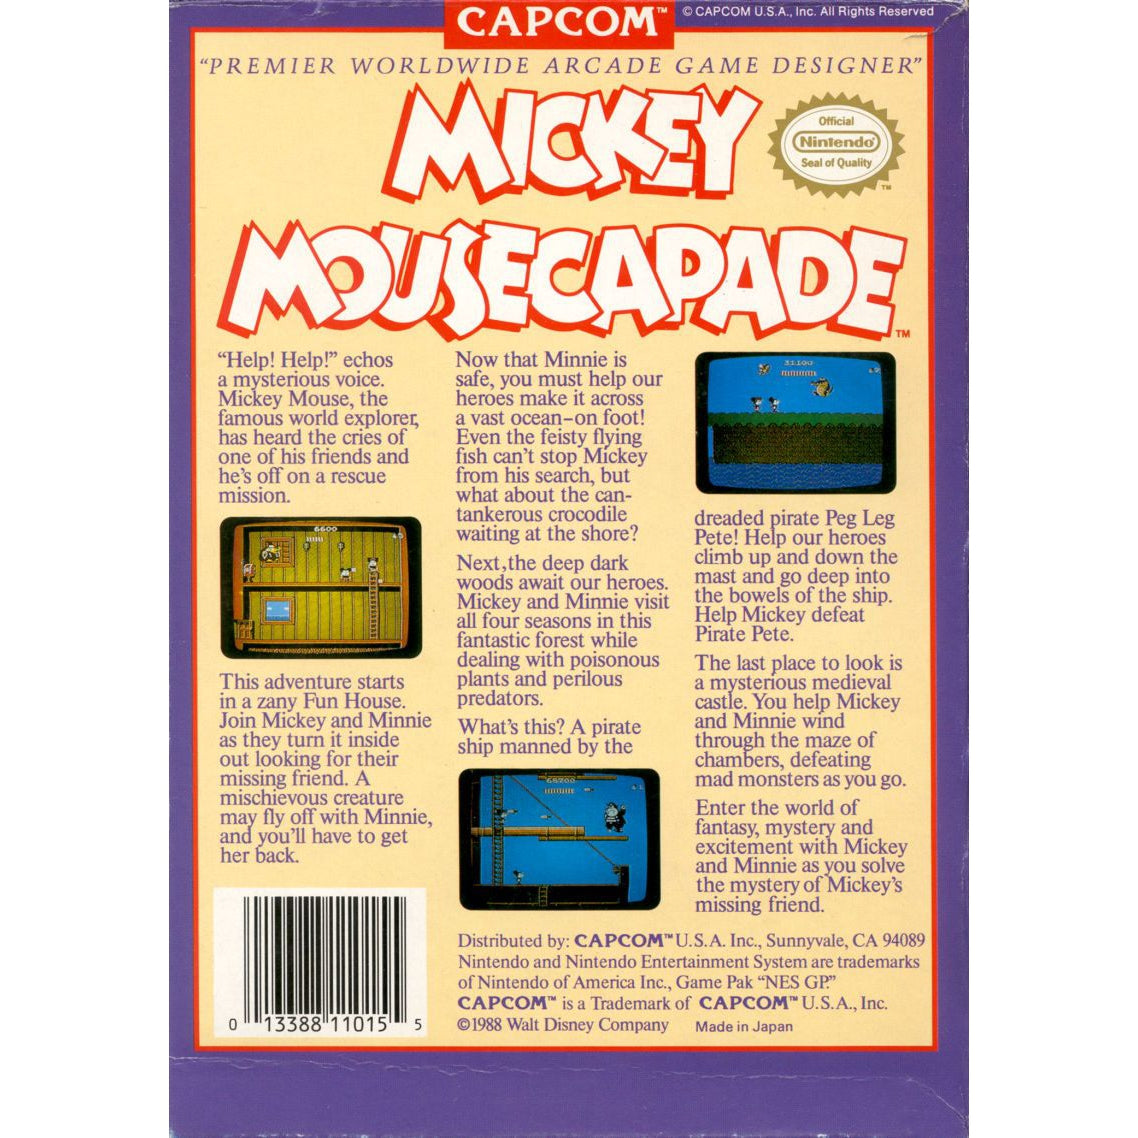 Your Gaming Shop - Mickey Mousecapade - Authentic NES Game Cartridge